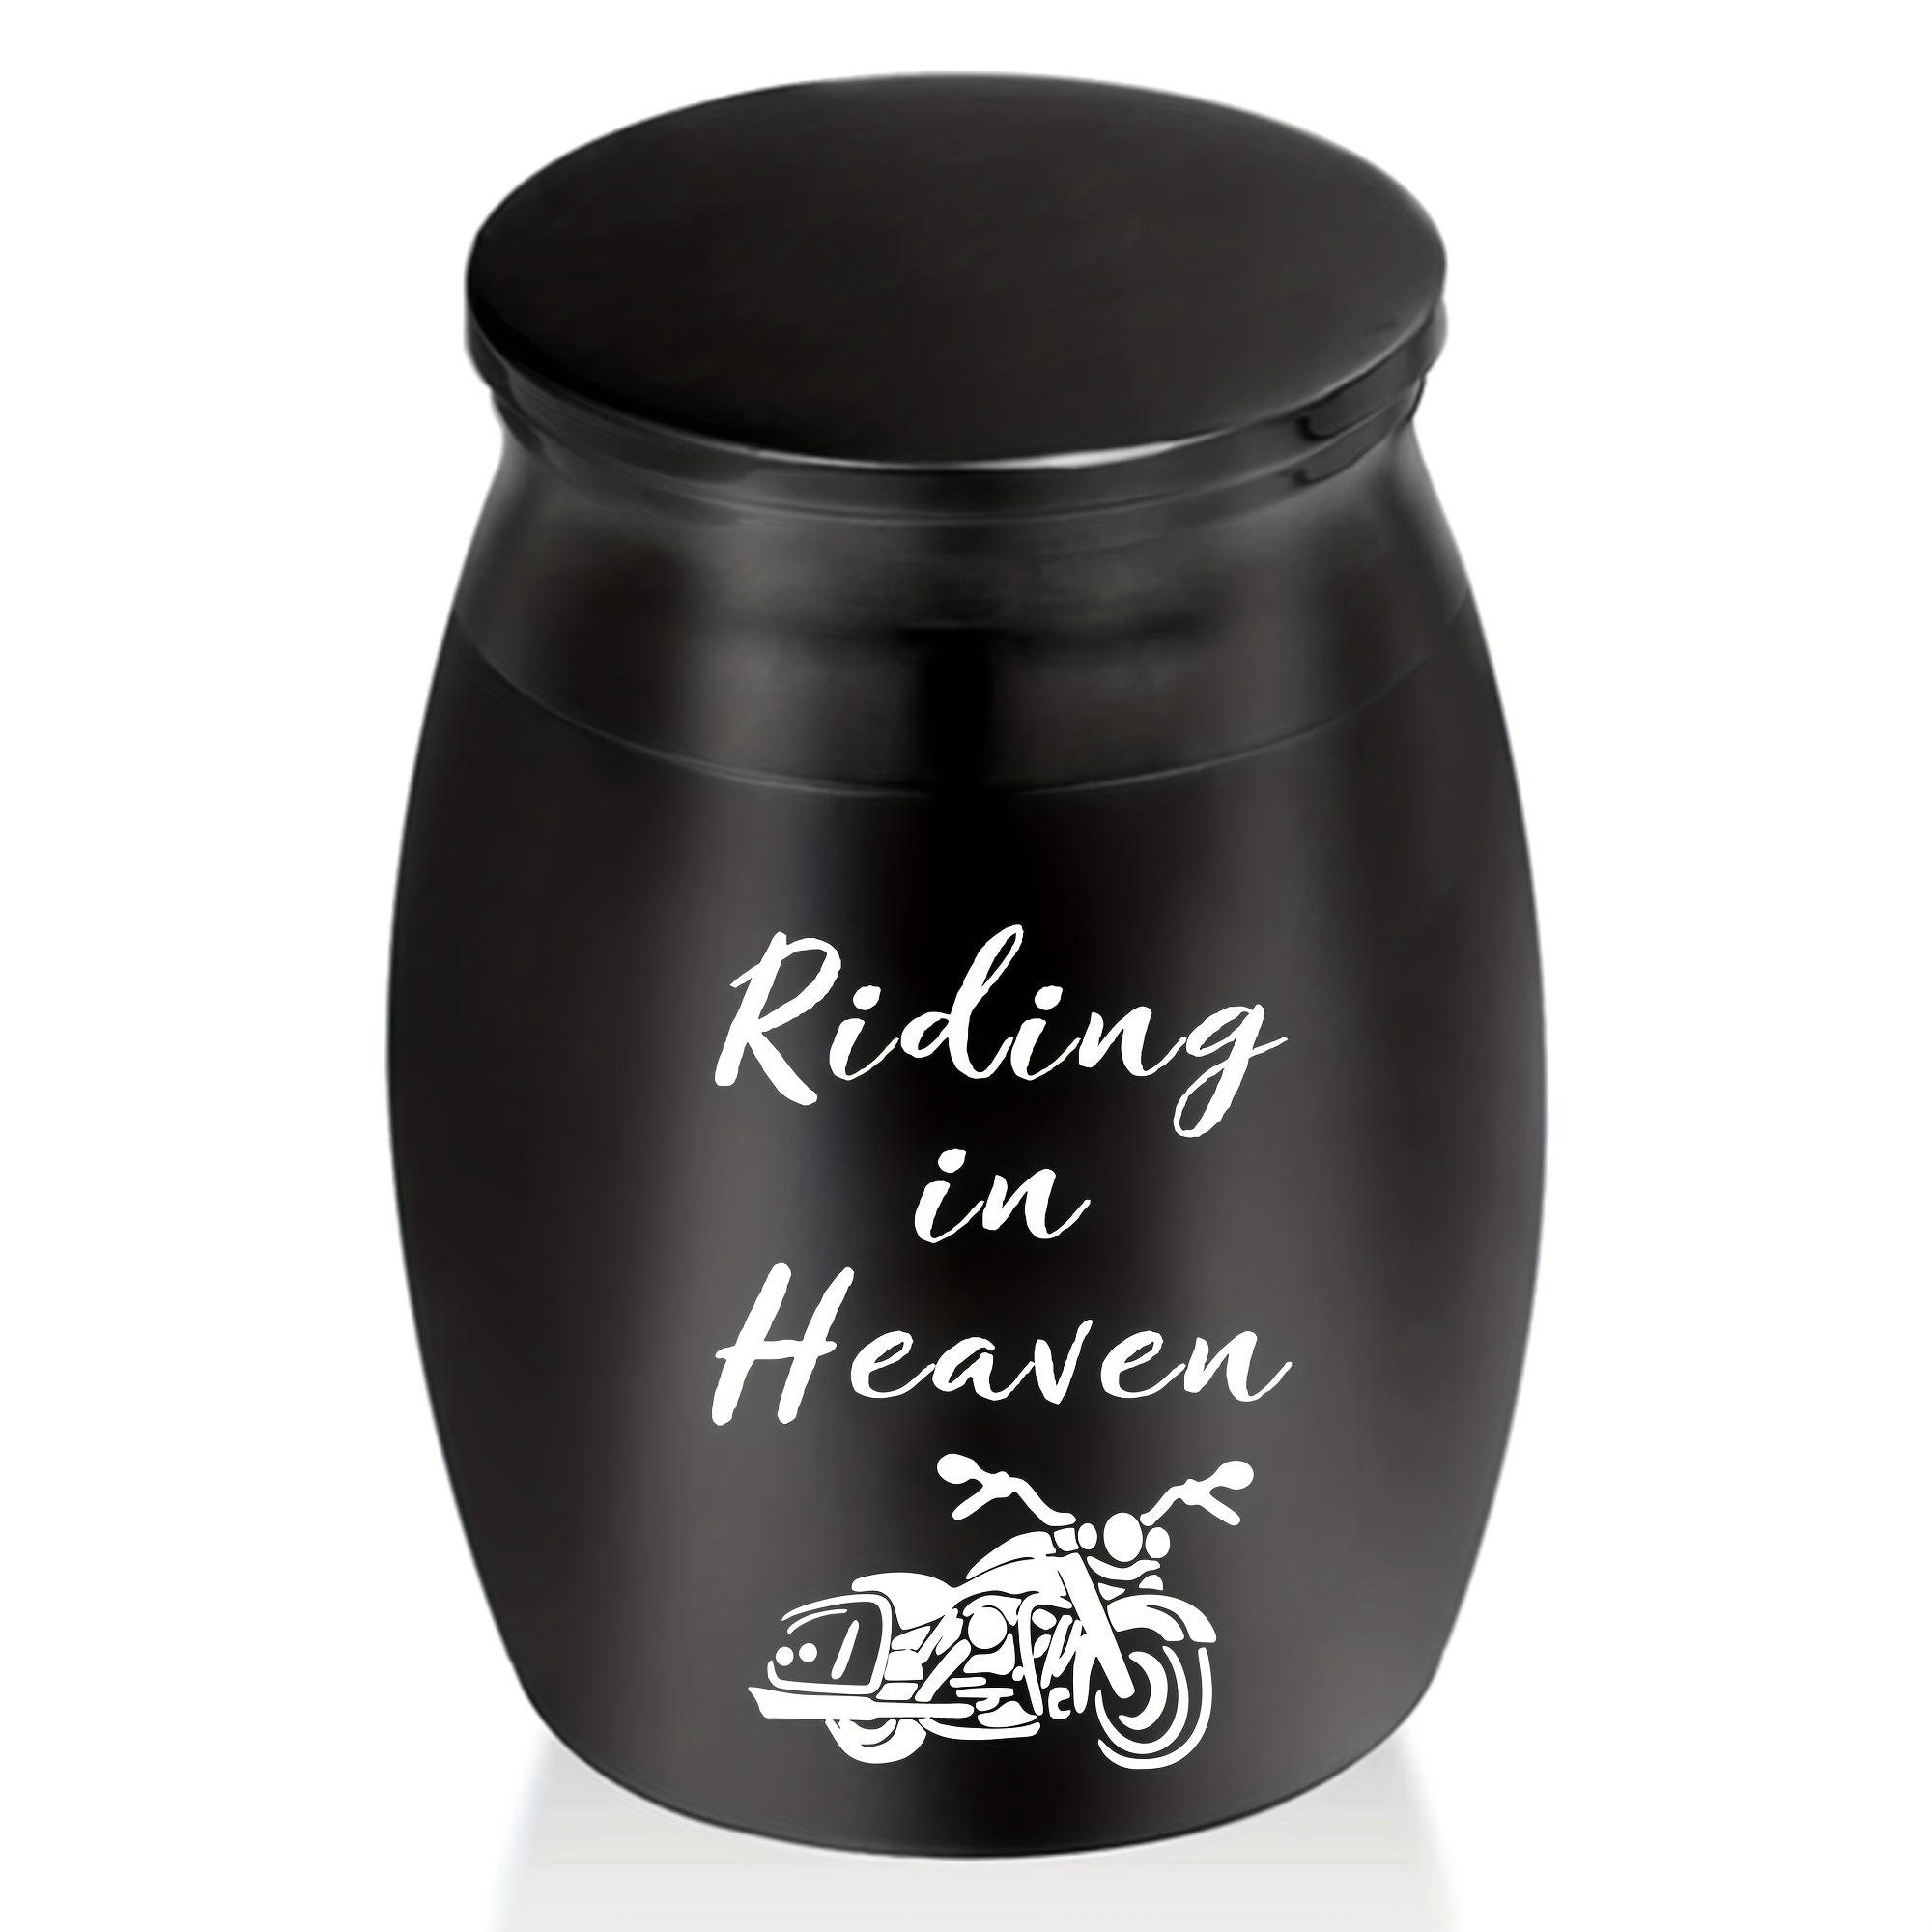  Small Urns for Human Ashes Cremation Urns for Ashes Gone  Fishing Mini Urns Ashes Holder Small Keepsake Urns for Ashes Decorative  Urns Sharing Funeral Urn,Black : Home & Kitchen